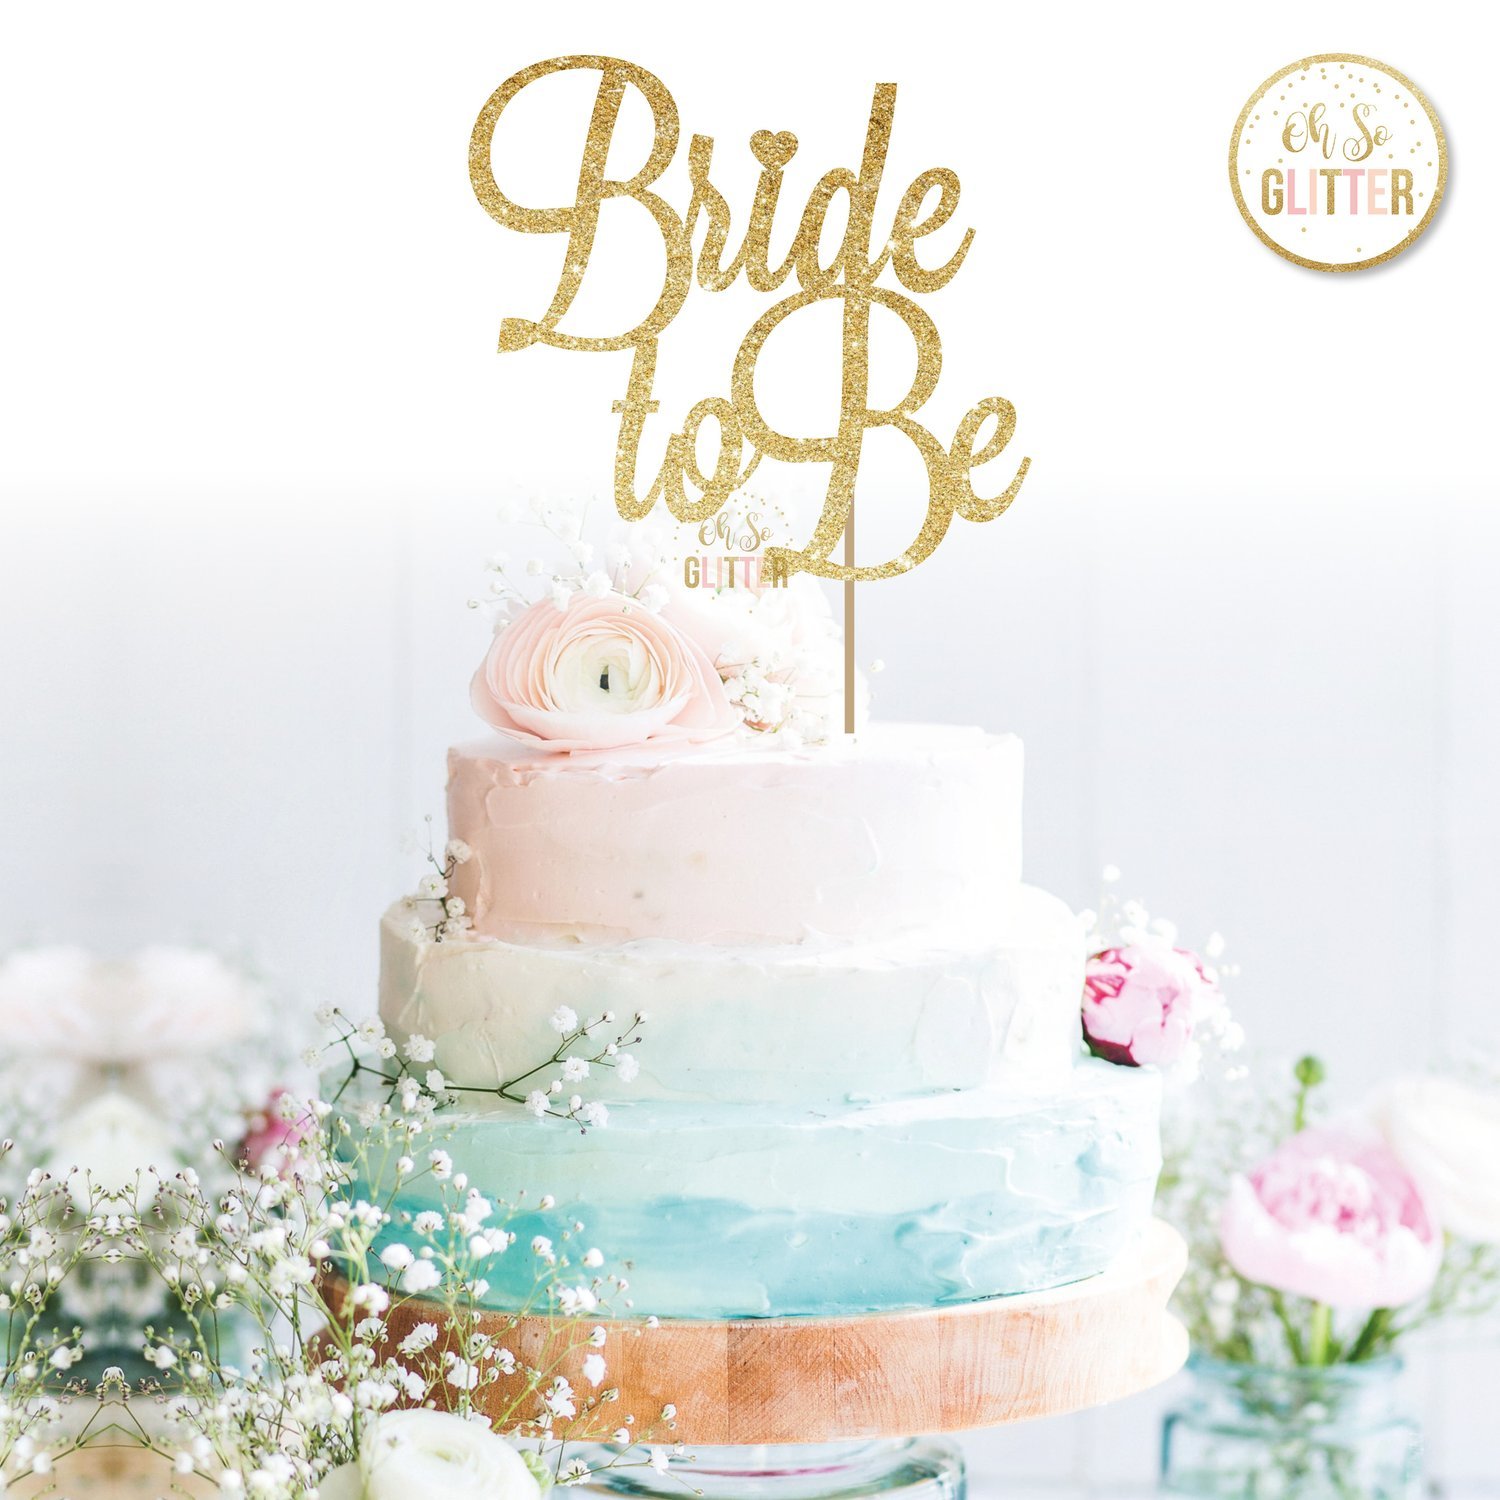 Bride to Be Cake Topper | Oh So Glitter